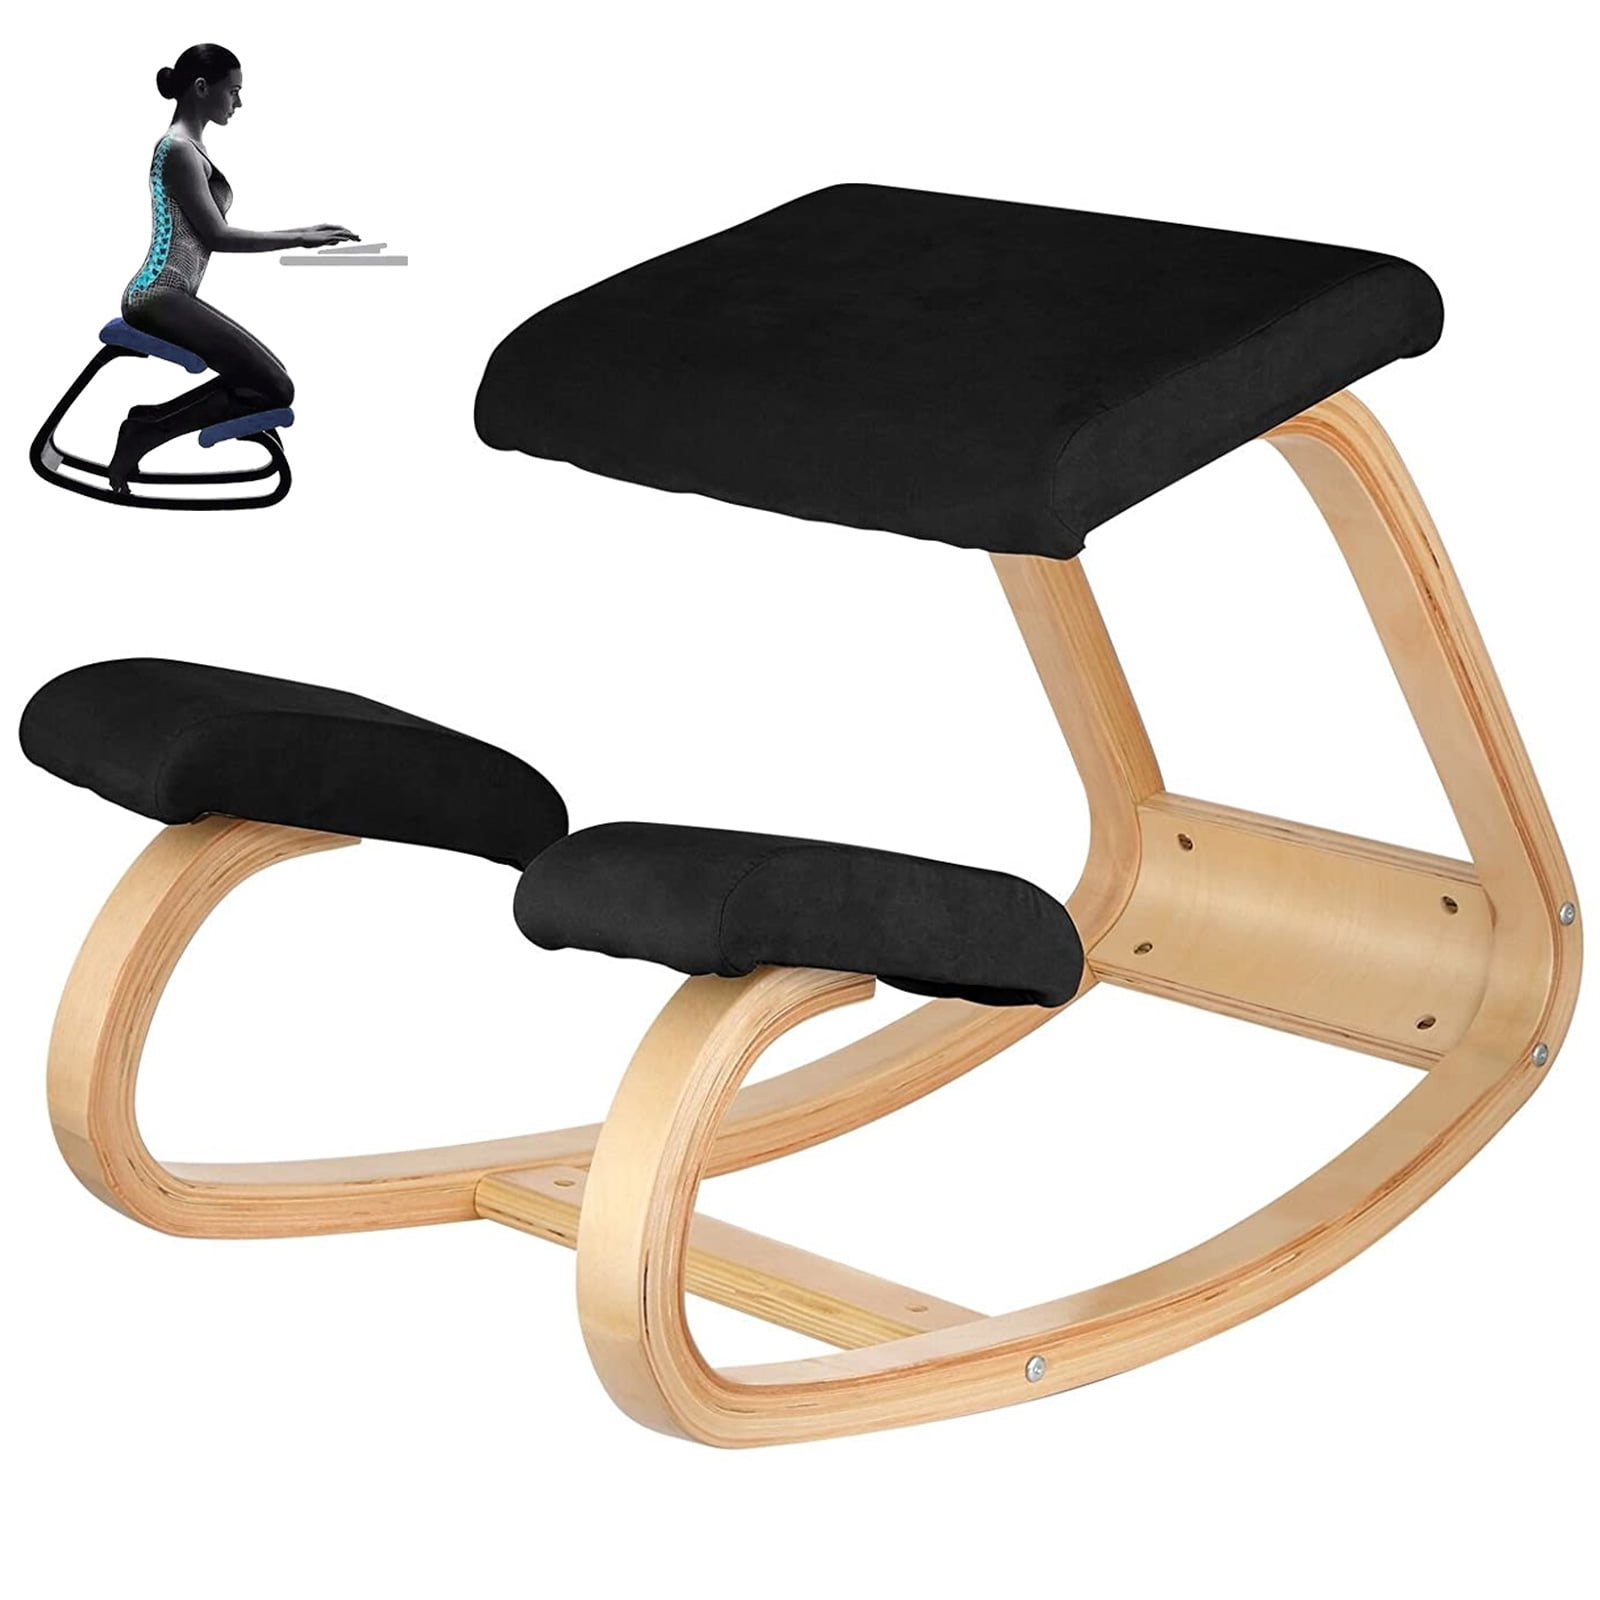 Wood Kneeling Chairs Balancing Body Office Orthopedic Stool with Handle  Cushions Adjustable Ergonomic Relieving Back Orthopedic and Neck Pain